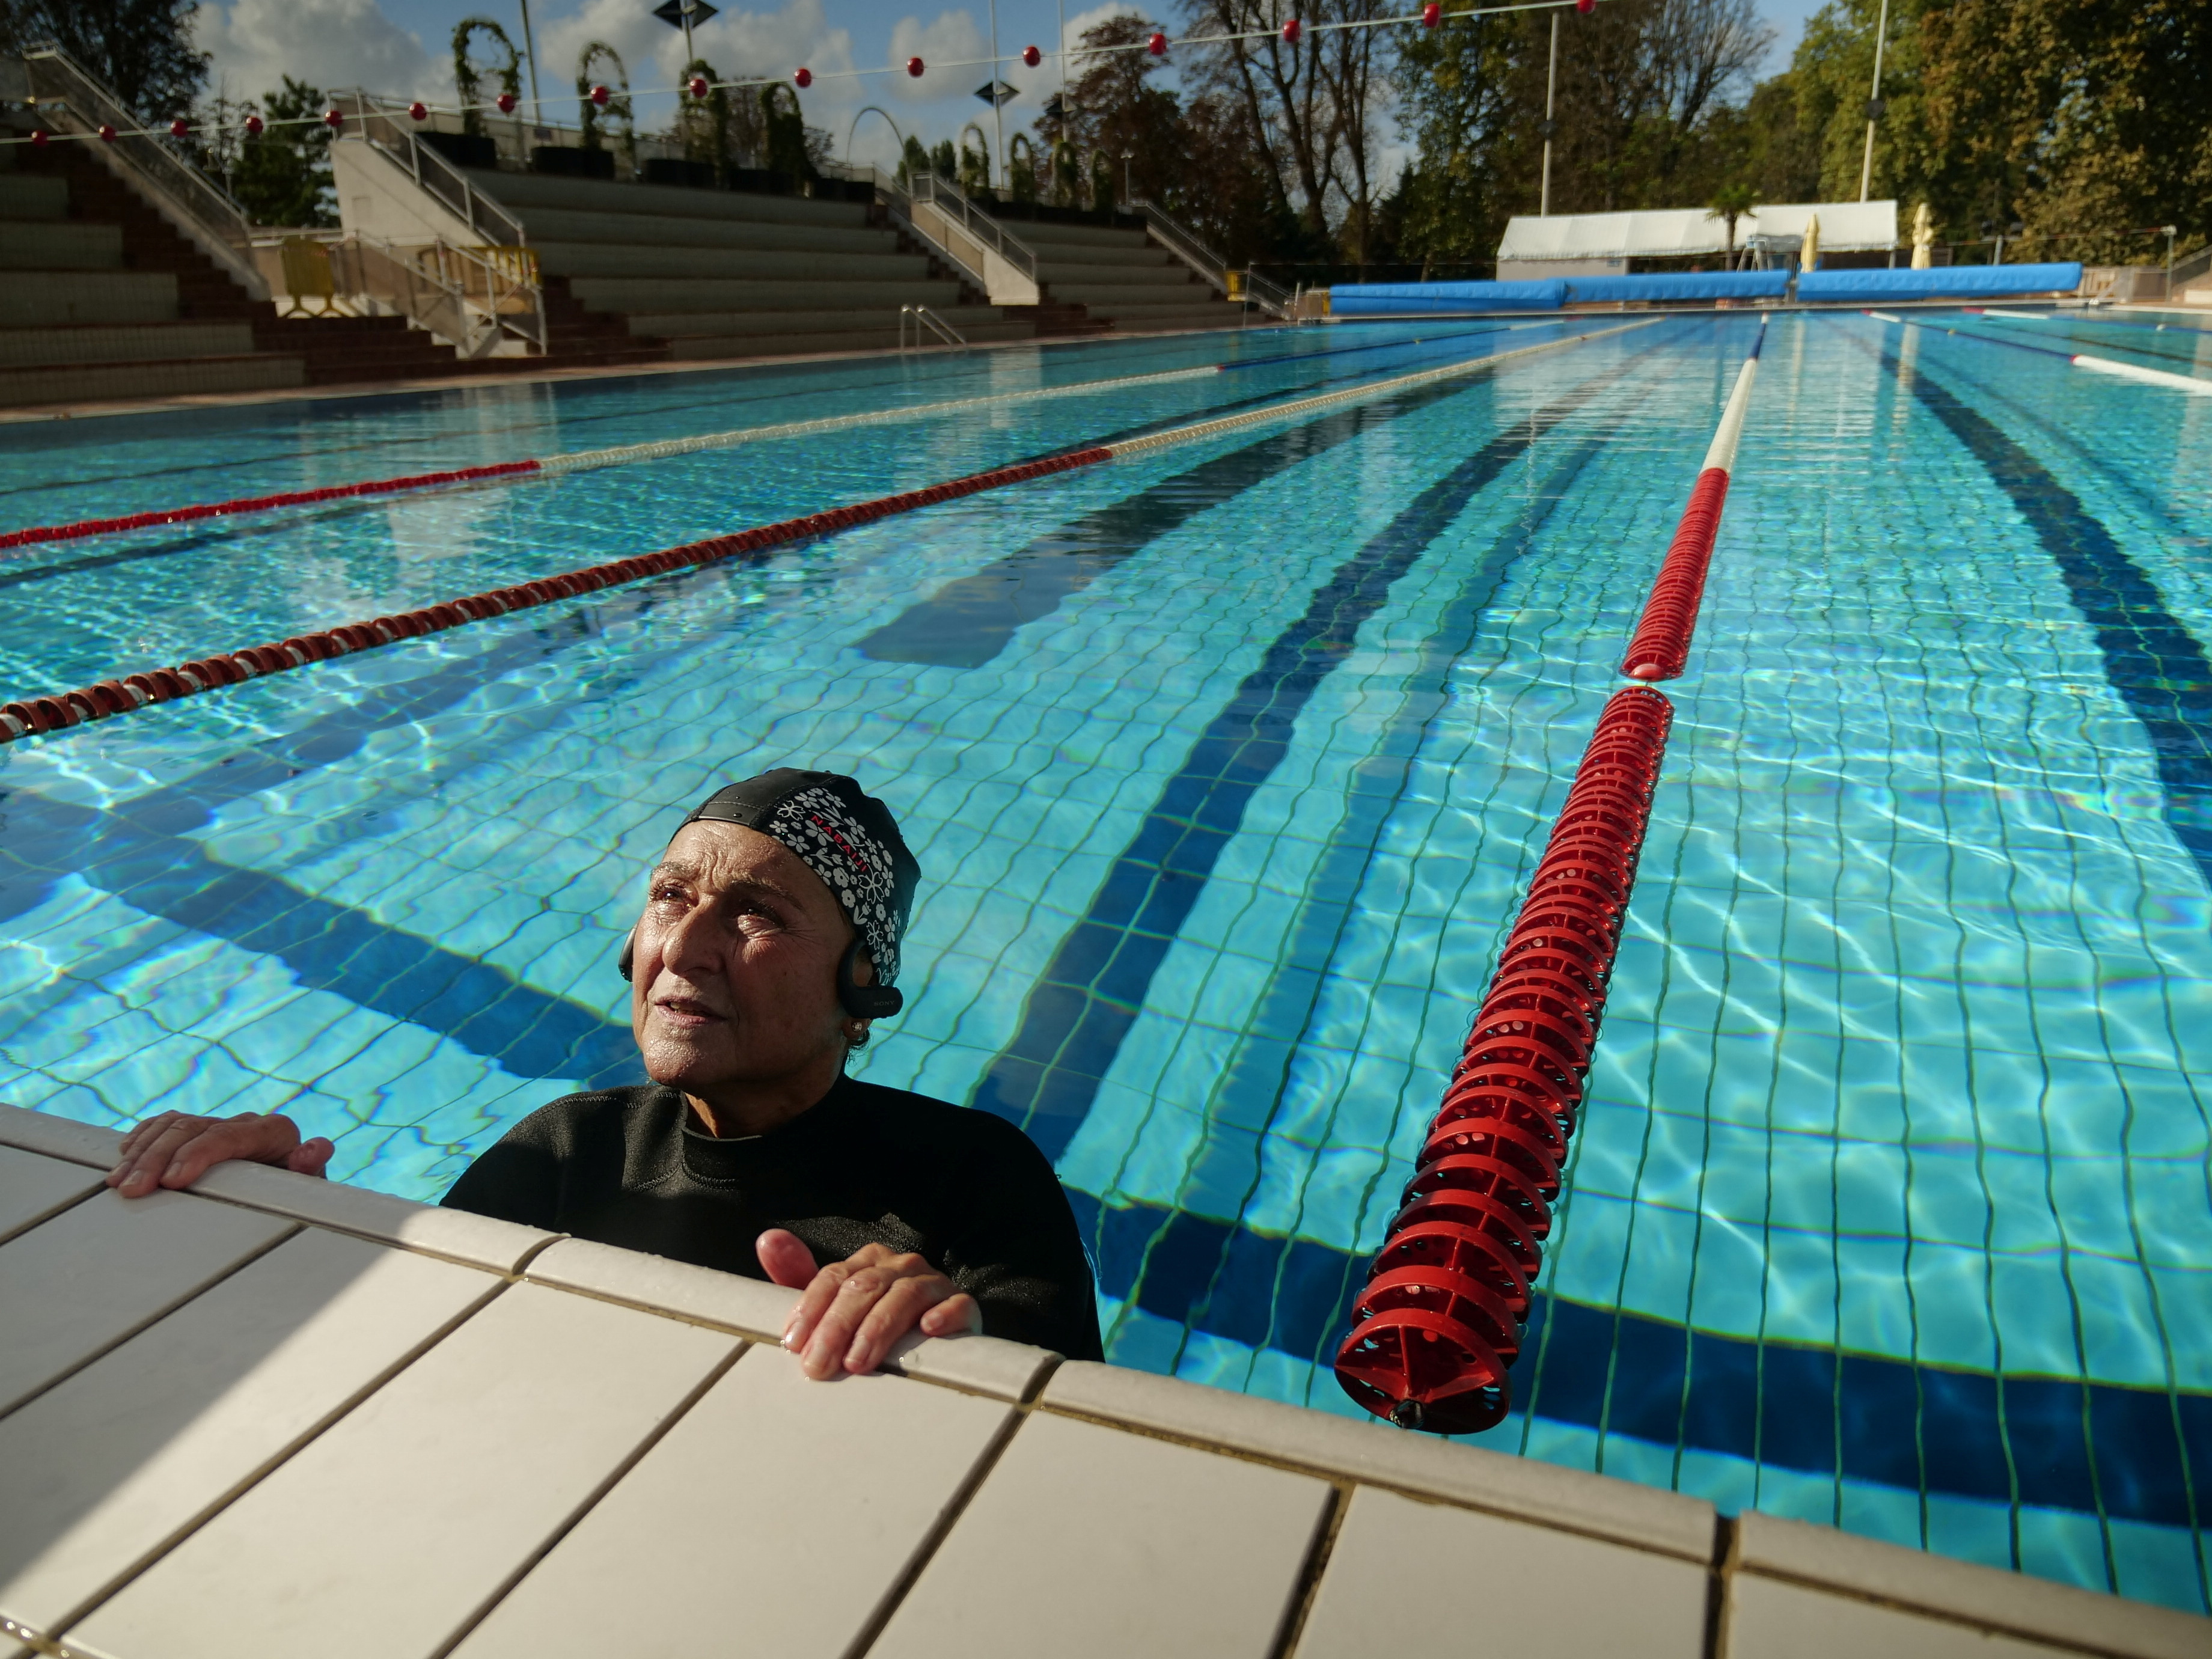 Brrrr! Wetsuits required as French outdoor pool cuts heating